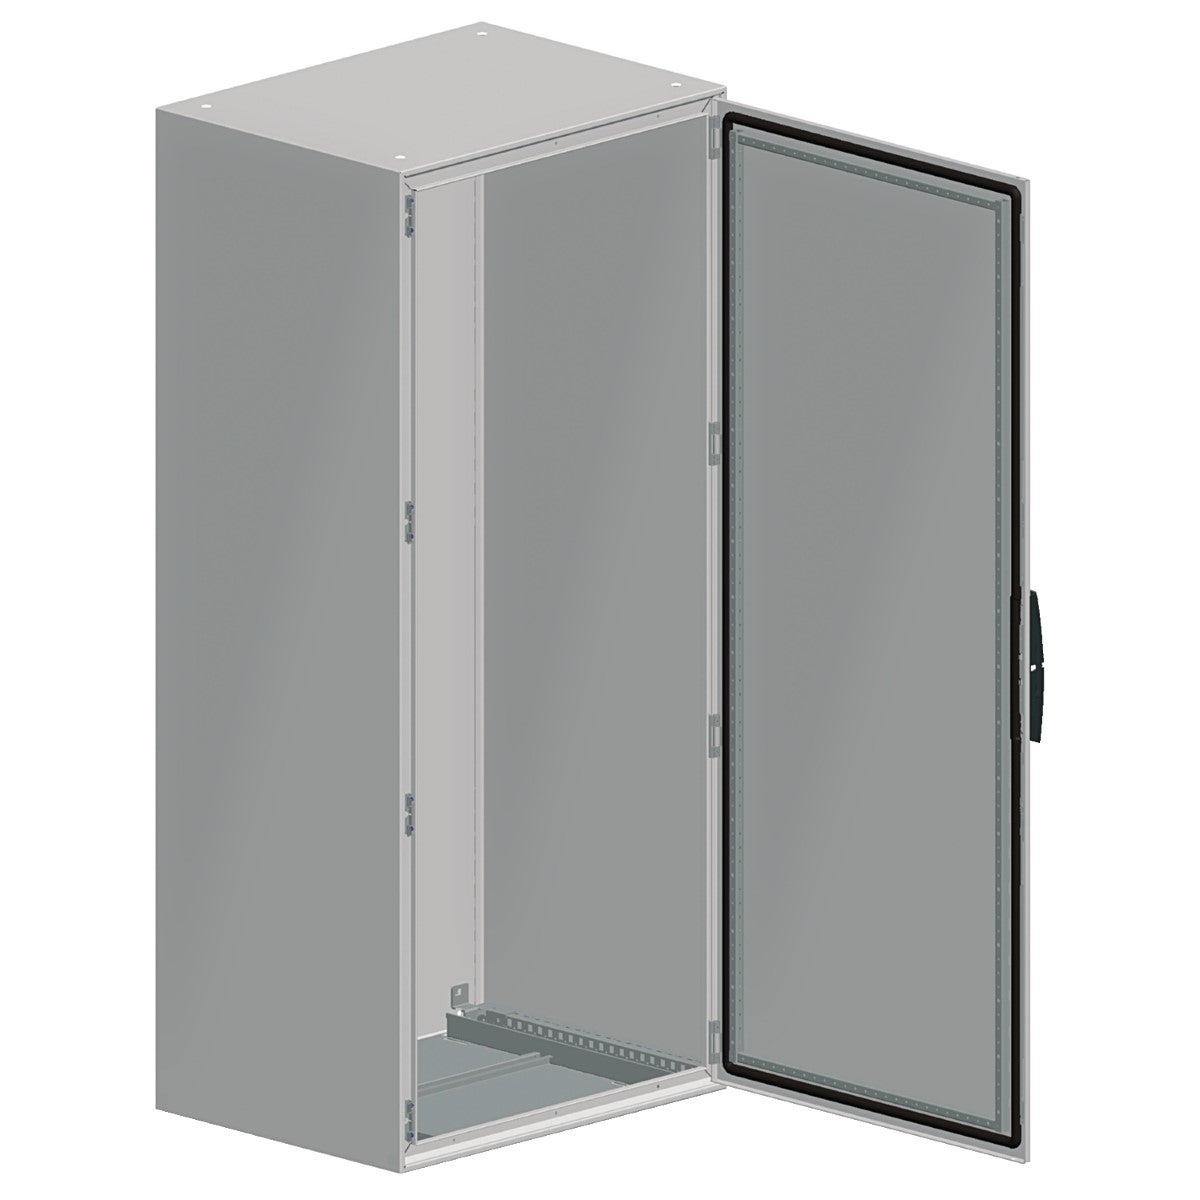 Spacial SM compact enclosure without mounting plate - 1800x800x500 mm